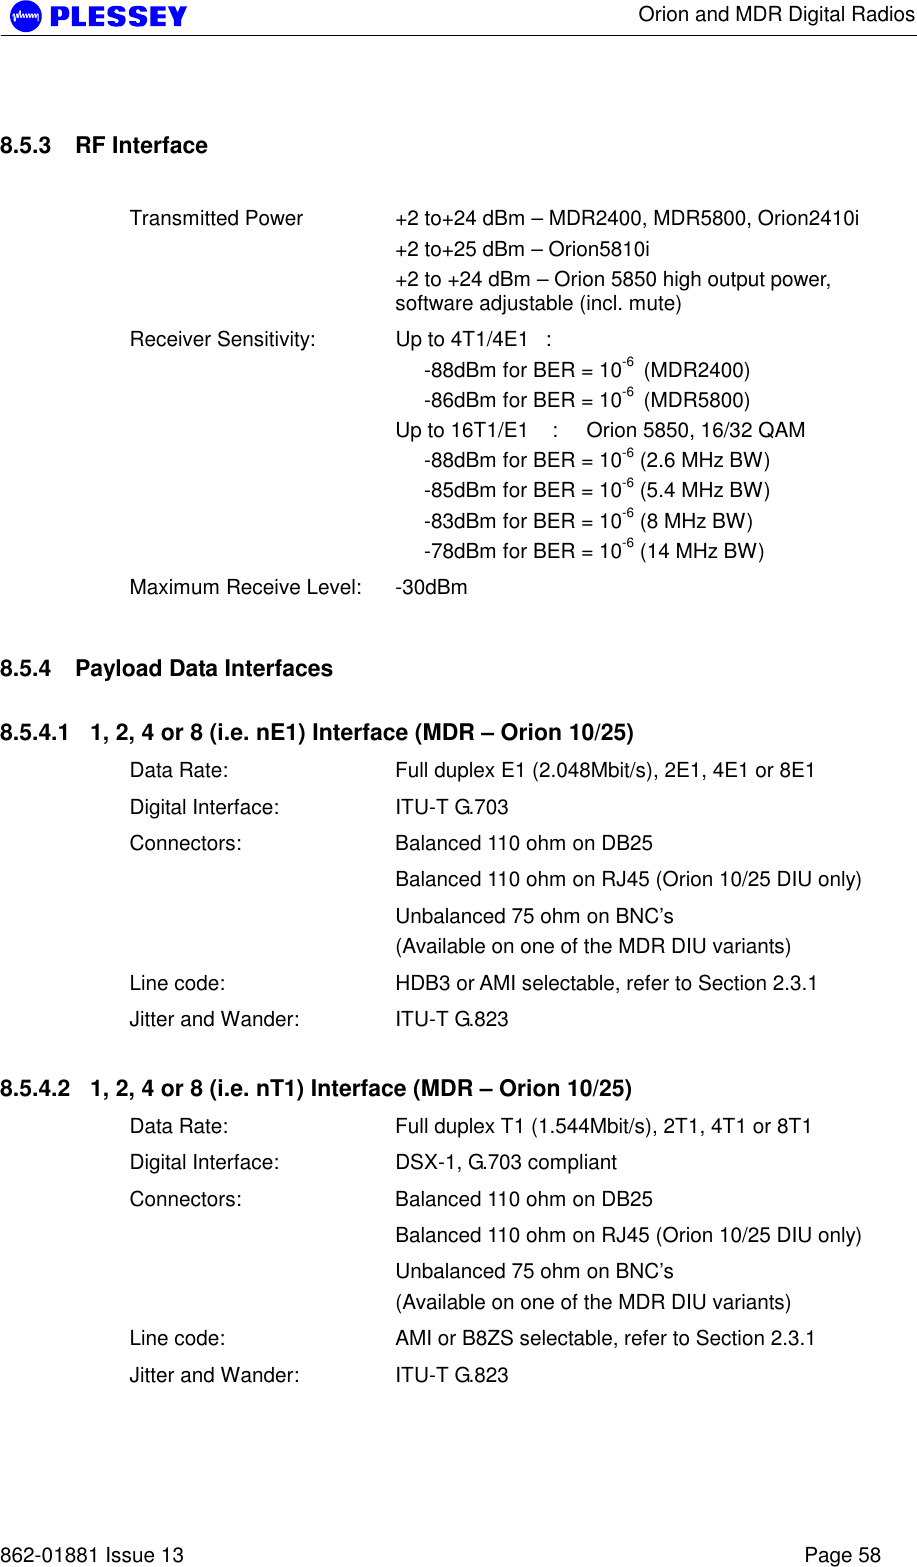      Orion and MDR Digital Radios   862-01881 Issue 13    Page 58 8.5.3  RF Interface   Transmitted Power   +2 to+24 dBm – MDR2400, MDR5800, Orion2410i +2 to+25 dBm – Orion5810i  +2 to +24 dBm – Orion 5850 high output power, software adjustable (incl. mute) Receiver Sensitivity:  Up to 4T1/4E1  :       -88dBm for BER = 10-6  (MDR2400)      -86dBm for BER = 10-6  (MDR5800) Up to 16T1/E1    :     Orion 5850, 16/32 QAM      -88dBm for BER = 10-6 (2.6 MHz BW)      -85dBm for BER = 10-6 (5.4 MHz BW)      -83dBm for BER = 10-6 (8 MHz BW)      -78dBm for BER = 10-6 (14 MHz BW) Maximum Receive Level:  -30dBm 8.5.4  Payload Data Interfaces 8.5.4.1  1, 2, 4 or 8 (i.e. nE1) Interface (MDR – Orion 10/25) Data Rate:  Full duplex E1 (2.048Mbit/s), 2E1, 4E1 or 8E1 Digital Interface:  ITU-T G.703 Connectors:  Balanced 110 ohm on DB25   Balanced 110 ohm on RJ45 (Orion 10/25 DIU only)   Unbalanced 75 ohm on BNC’s  (Available on one of the MDR DIU variants) Line code:  HDB3 or AMI selectable, refer to Section 2.3.1 Jitter and Wander:  ITU-T G.823 8.5.4.2  1, 2, 4 or 8 (i.e. nT1) Interface (MDR – Orion 10/25) Data Rate:  Full duplex T1 (1.544Mbit/s), 2T1, 4T1 or 8T1 Digital Interface:  DSX-1, G.703 compliant Connectors:  Balanced 110 ohm on DB25   Balanced 110 ohm on RJ45 (Orion 10/25 DIU only)   Unbalanced 75 ohm on BNC’s  (Available on one of the MDR DIU variants) Line code:  AMI or B8ZS selectable, refer to Section 2.3.1 Jitter and Wander:  ITU-T G.823  